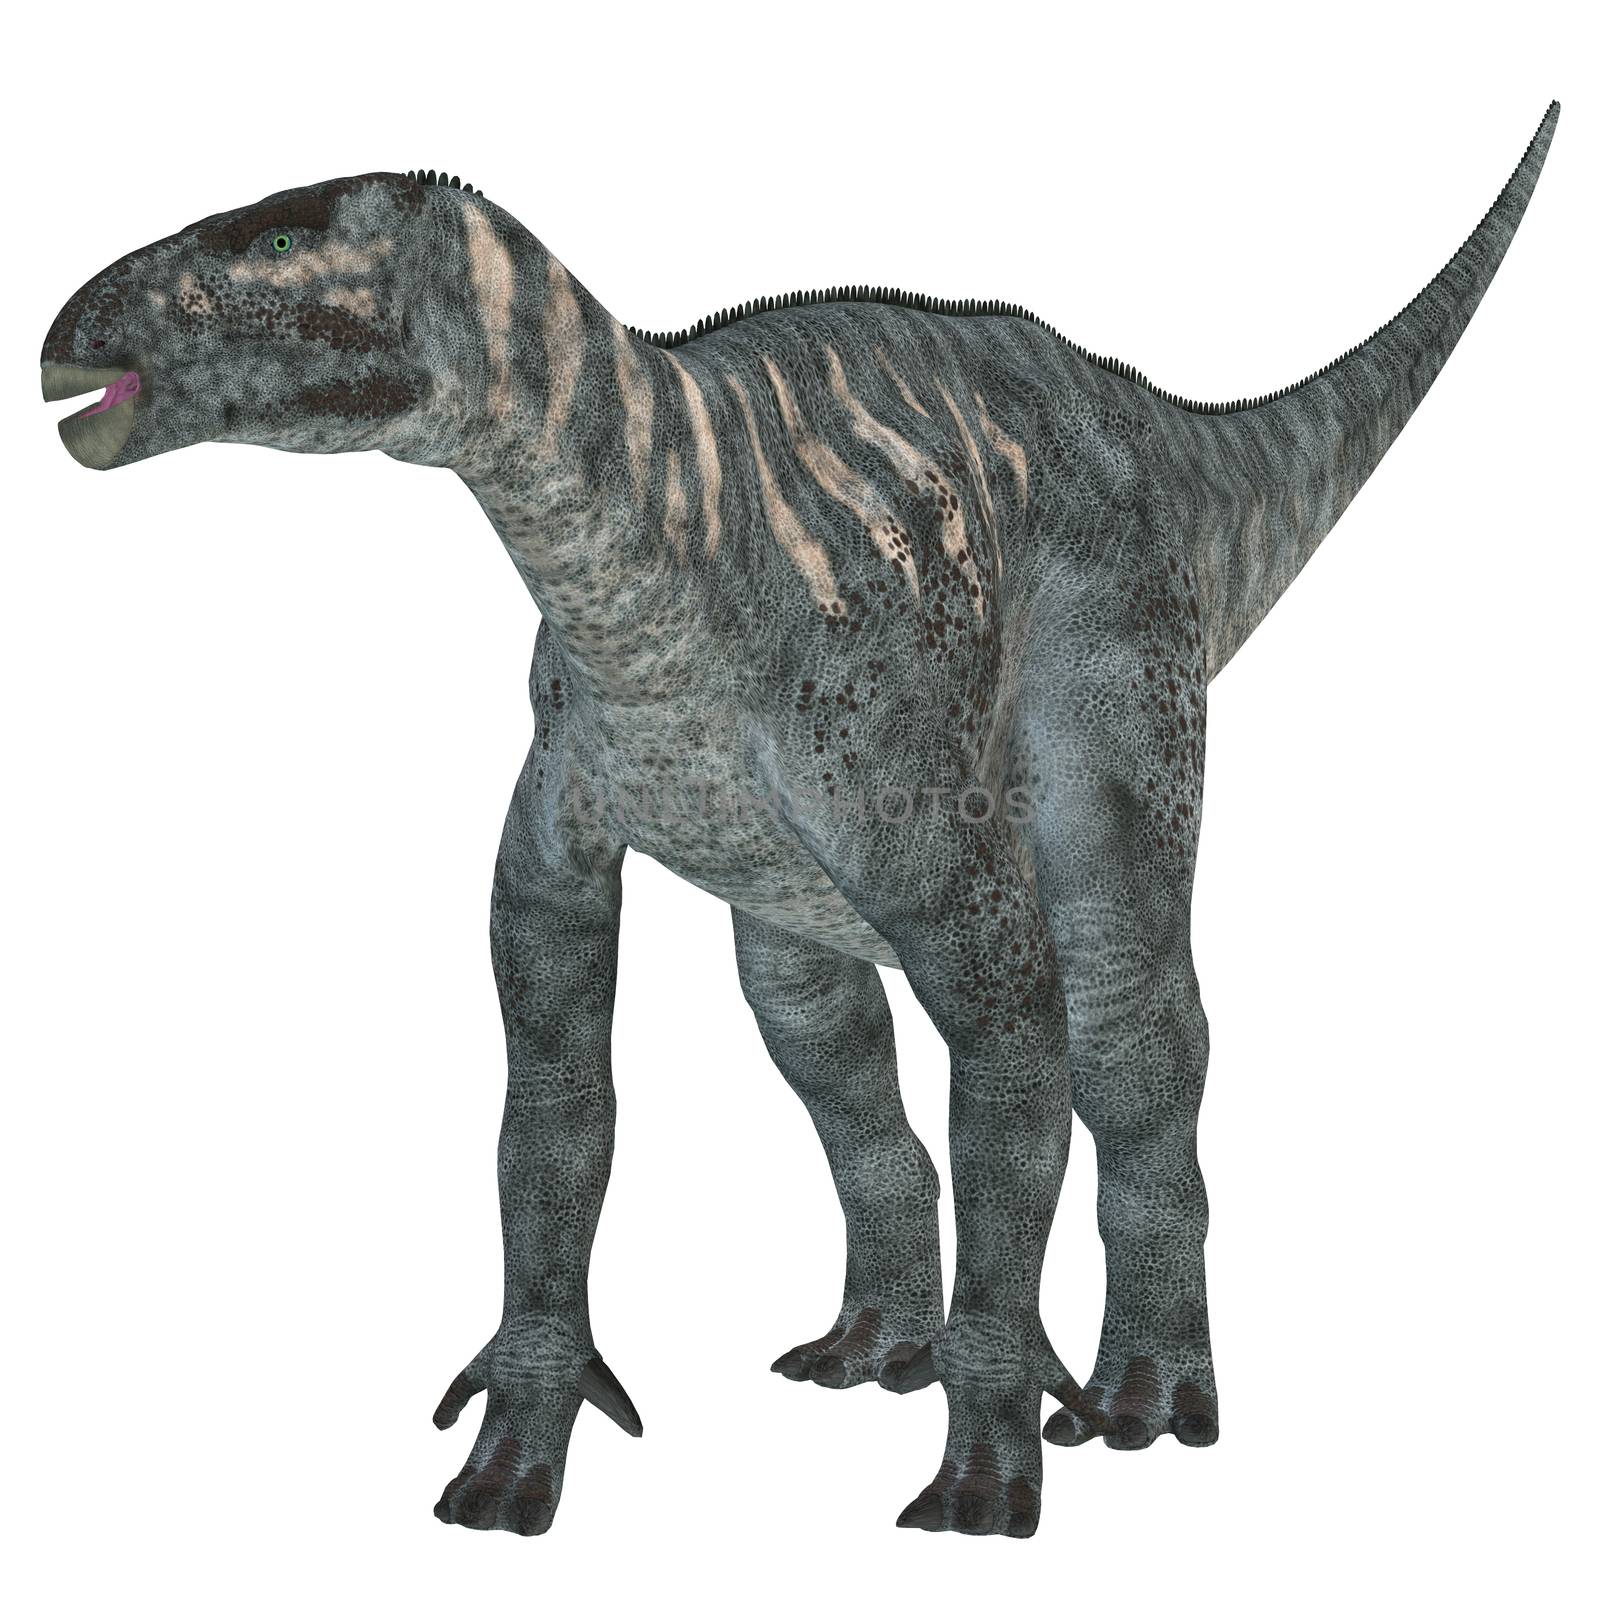 Iguanodon was a herbivorous dinosaur that lived in Europe during the Cretaceous Period.